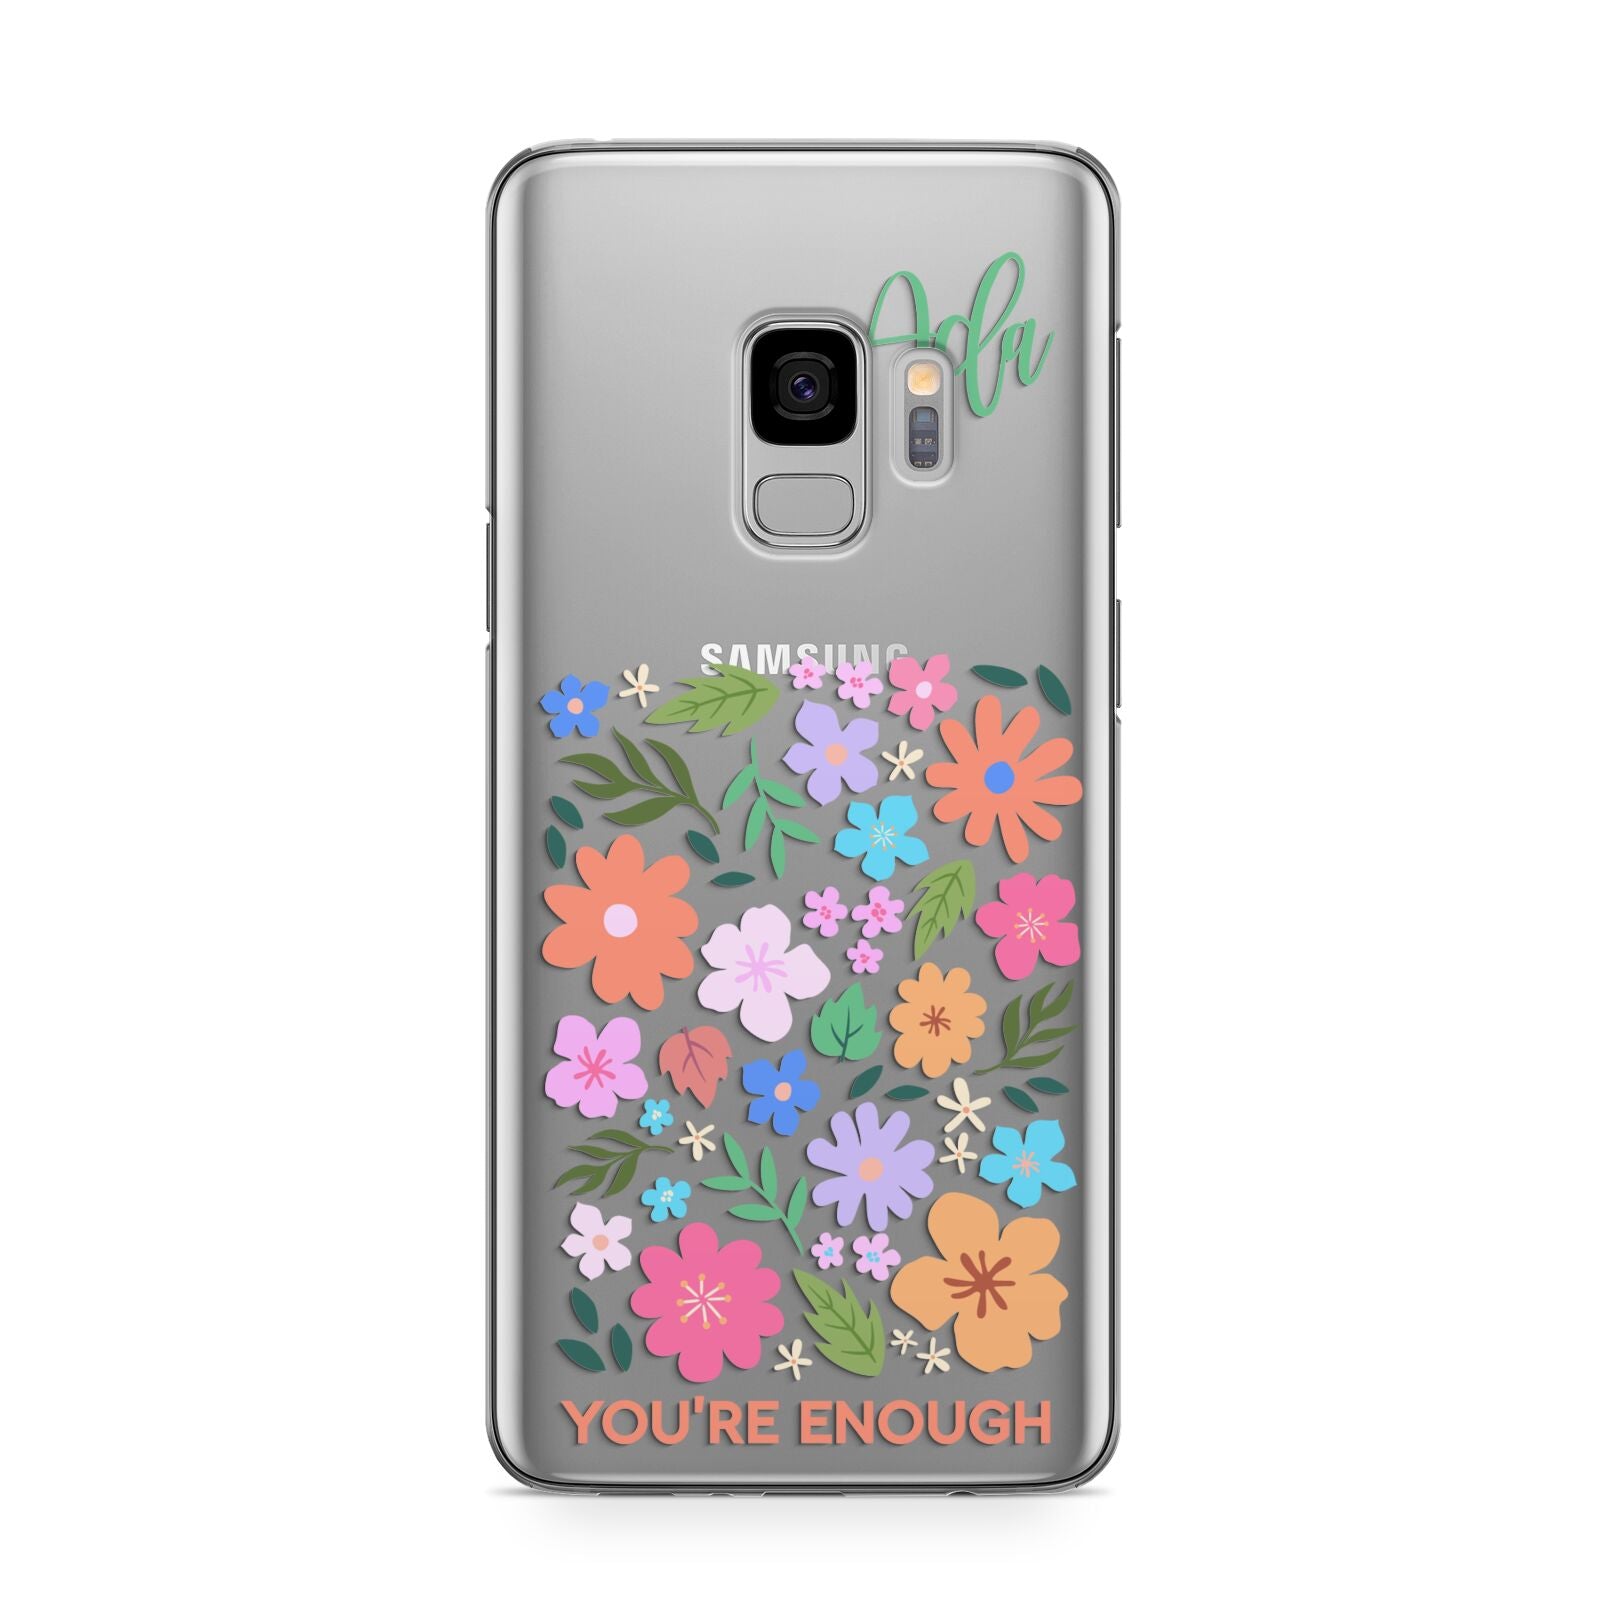 Floral Poster Samsung Galaxy S9 Case